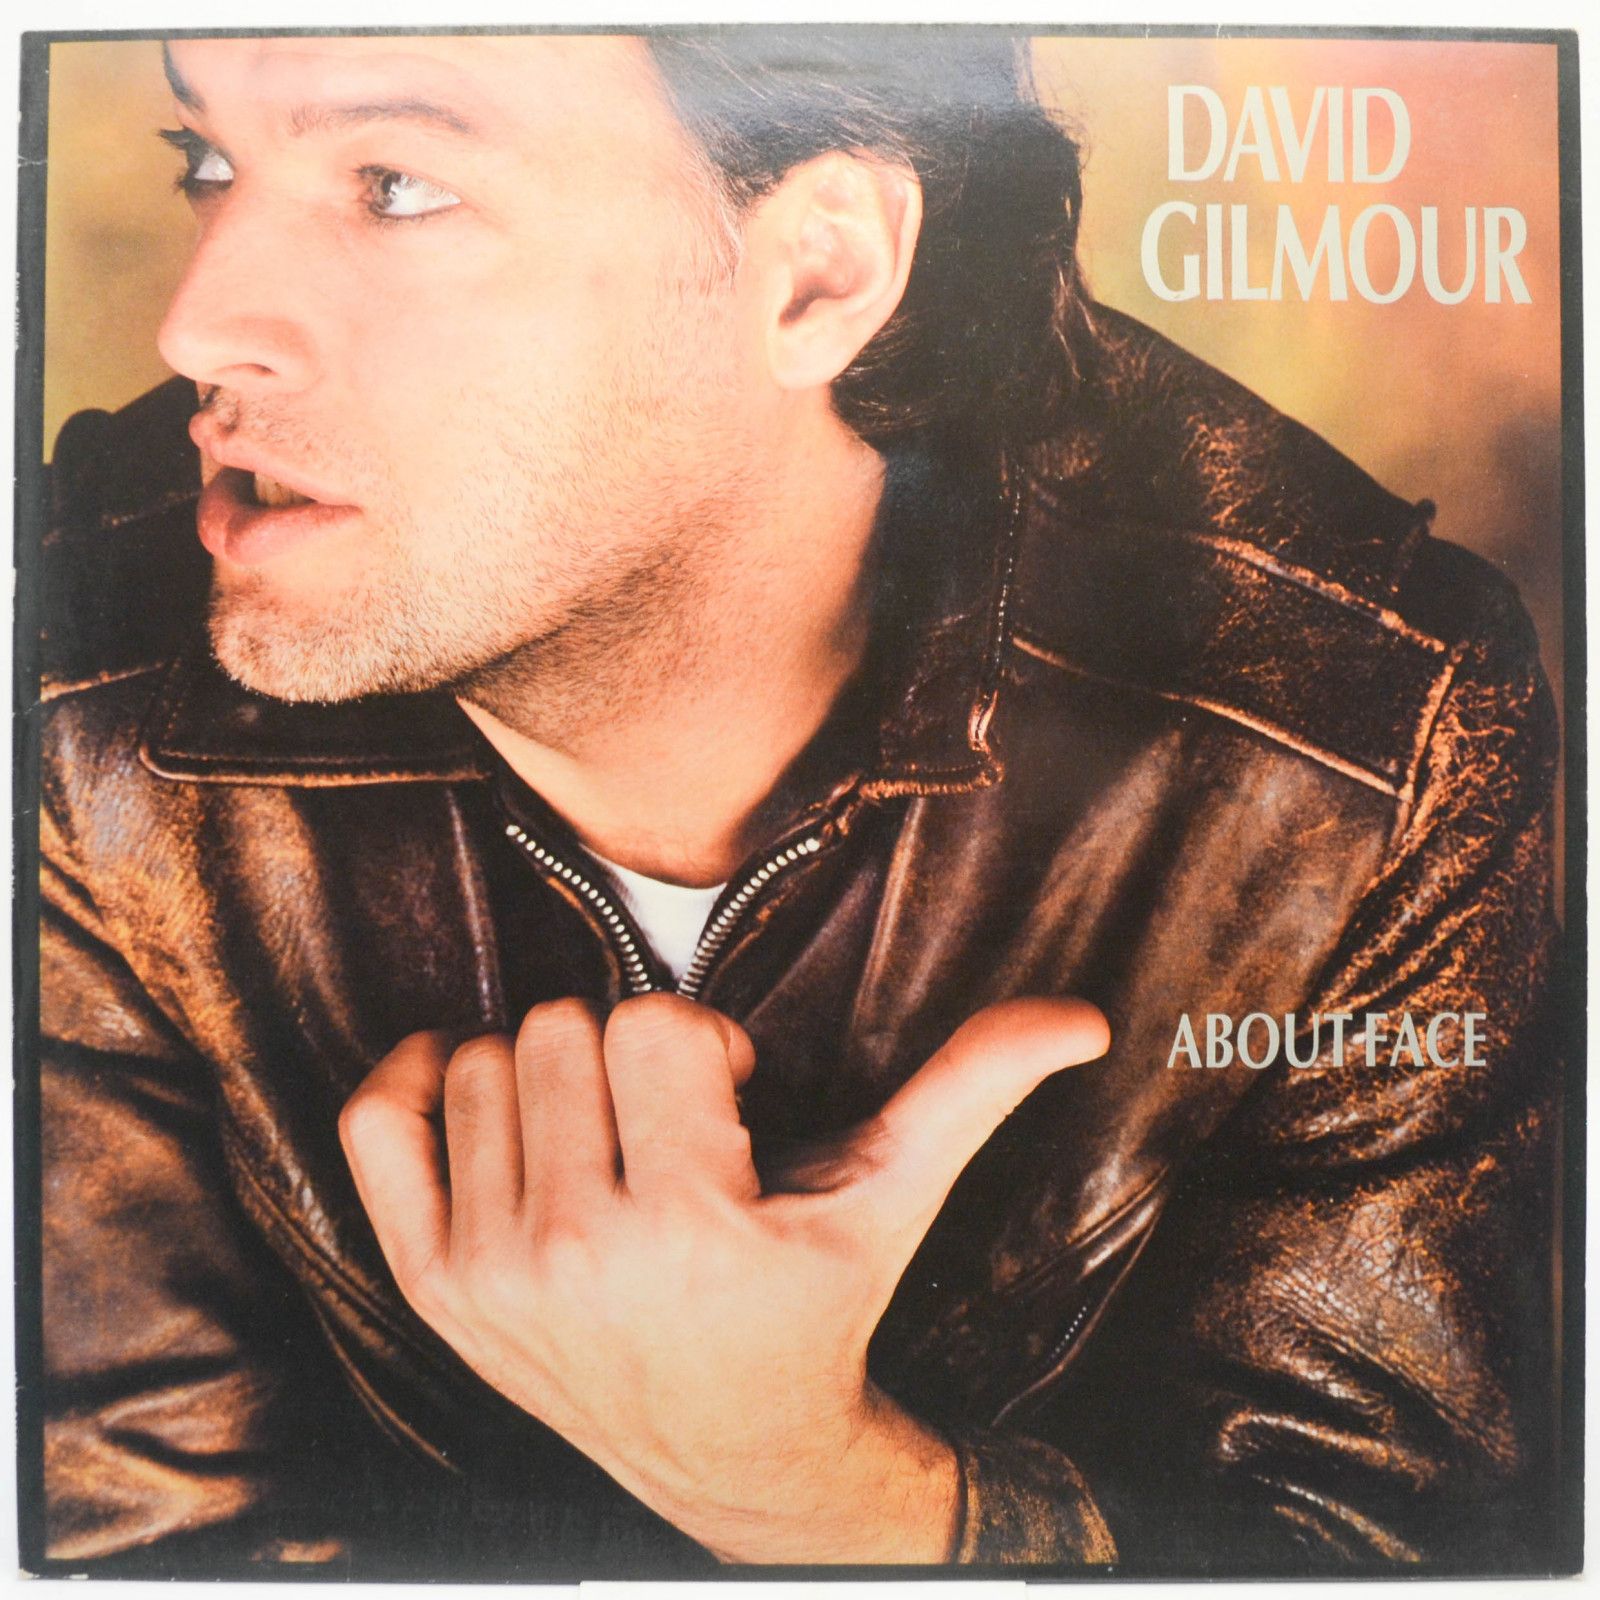 David Gilmour — About Face, 1984